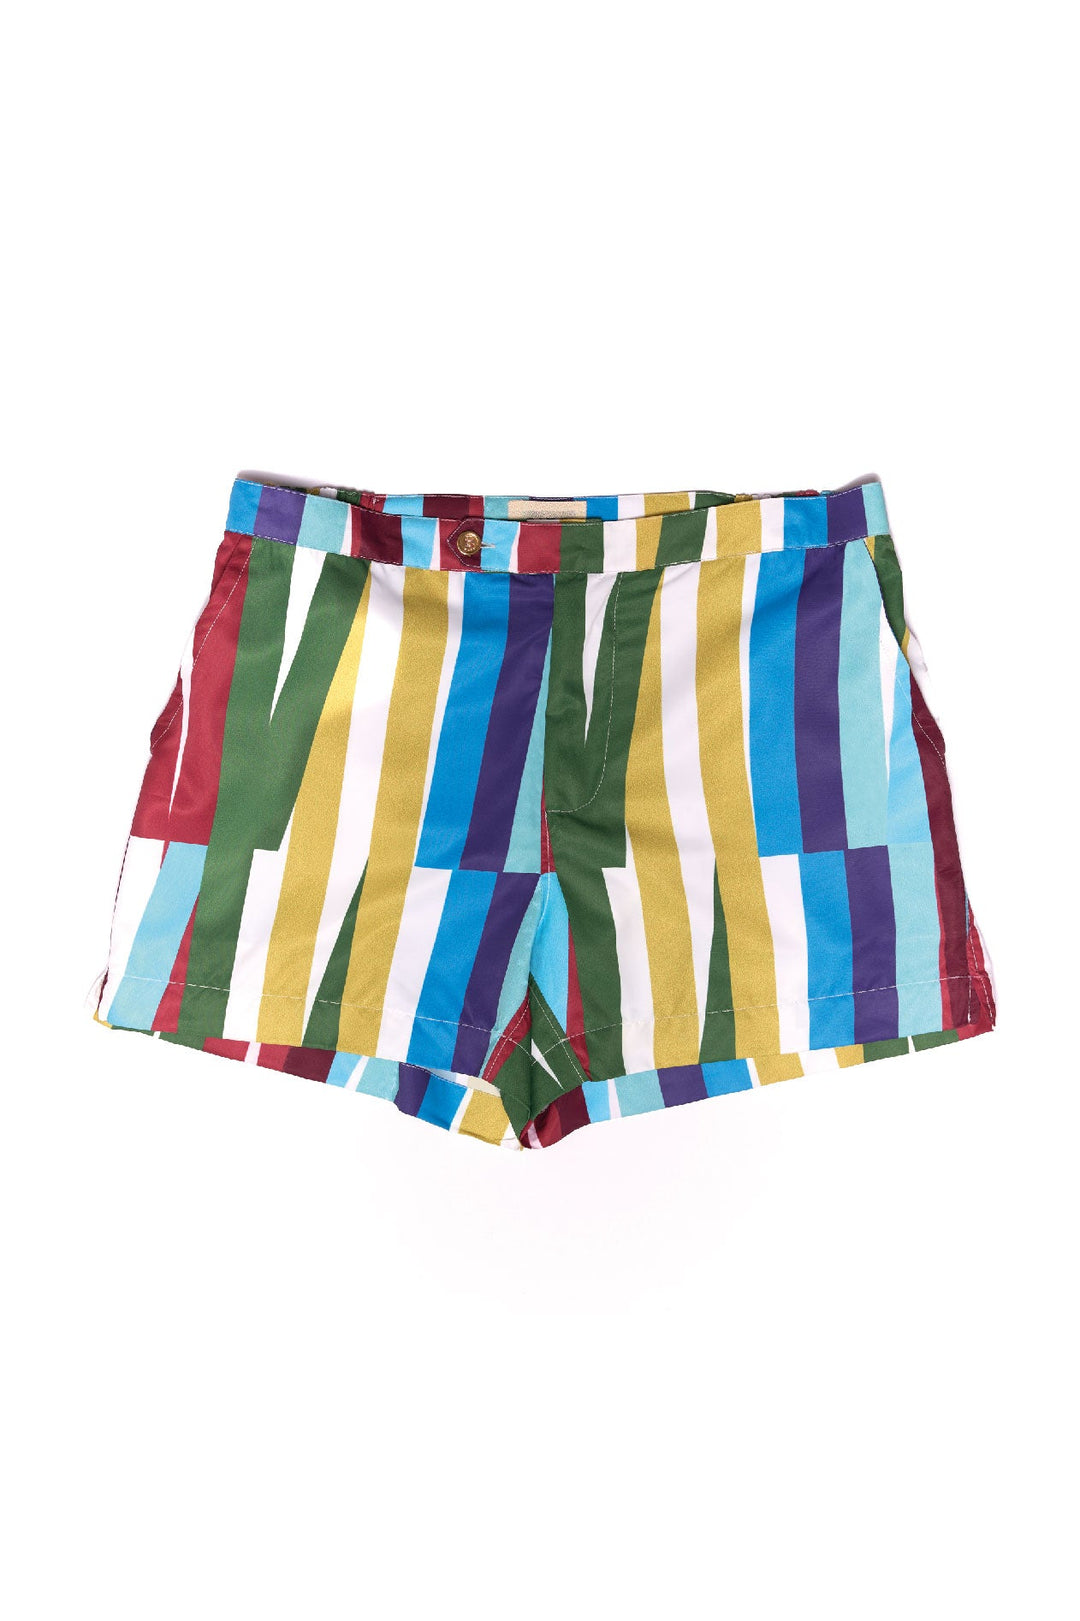 Multi-colored striped shorts with vertical patterns on a white background